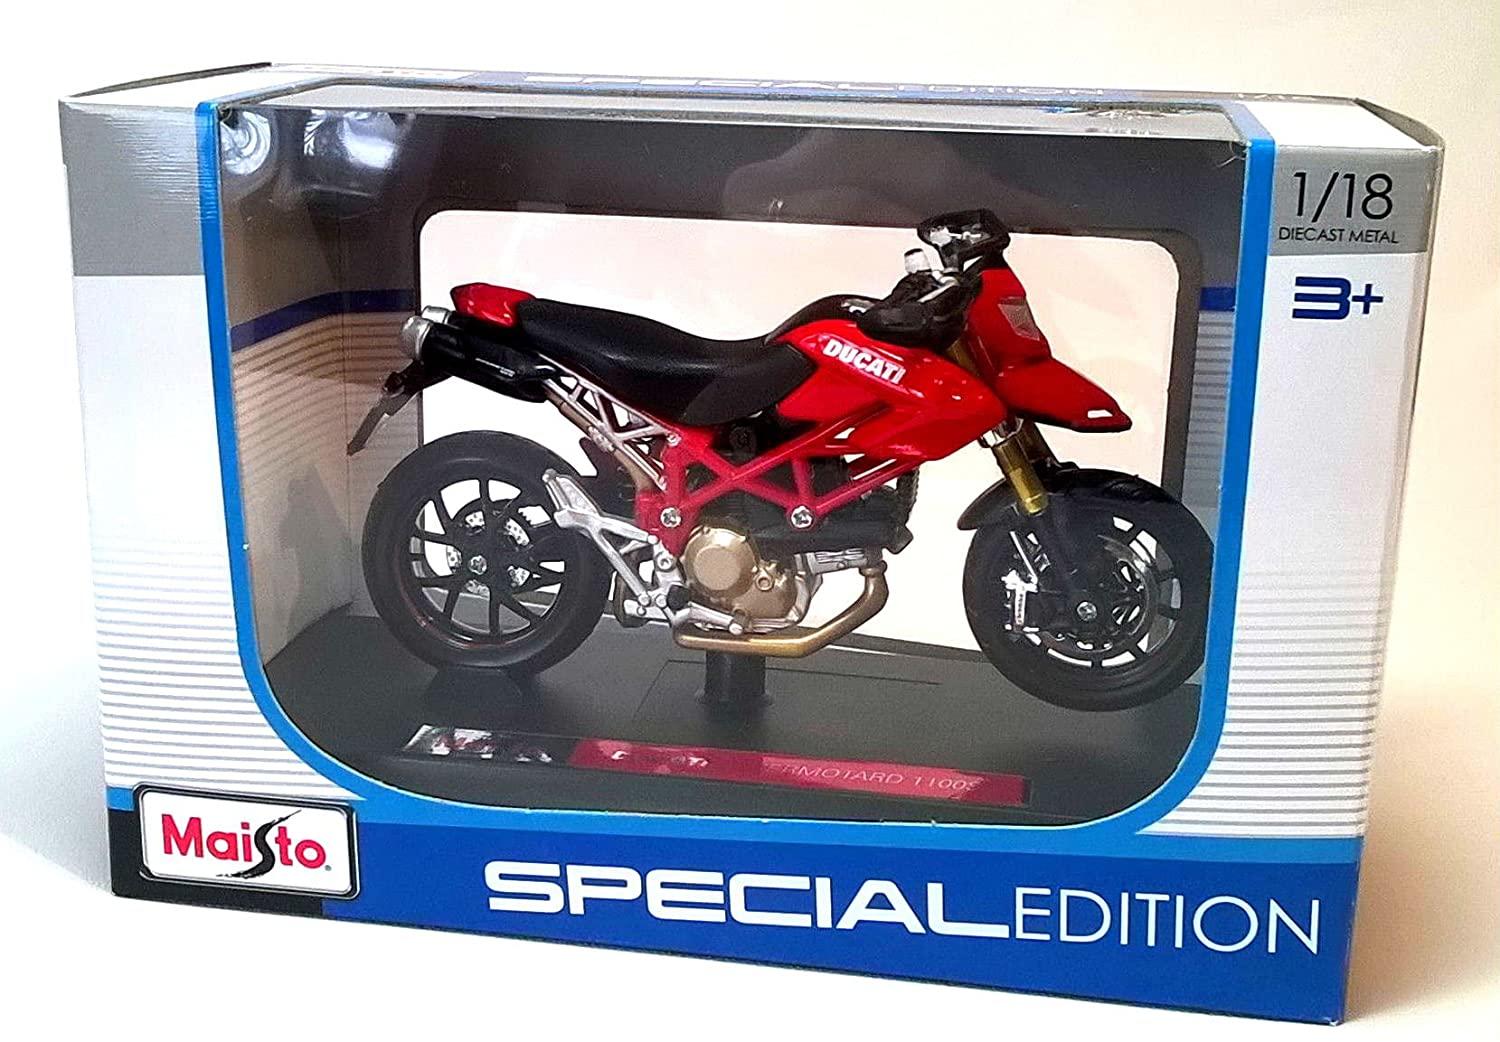 Ducati Hypermotard 1100S in red 1:18 scale from Maisto